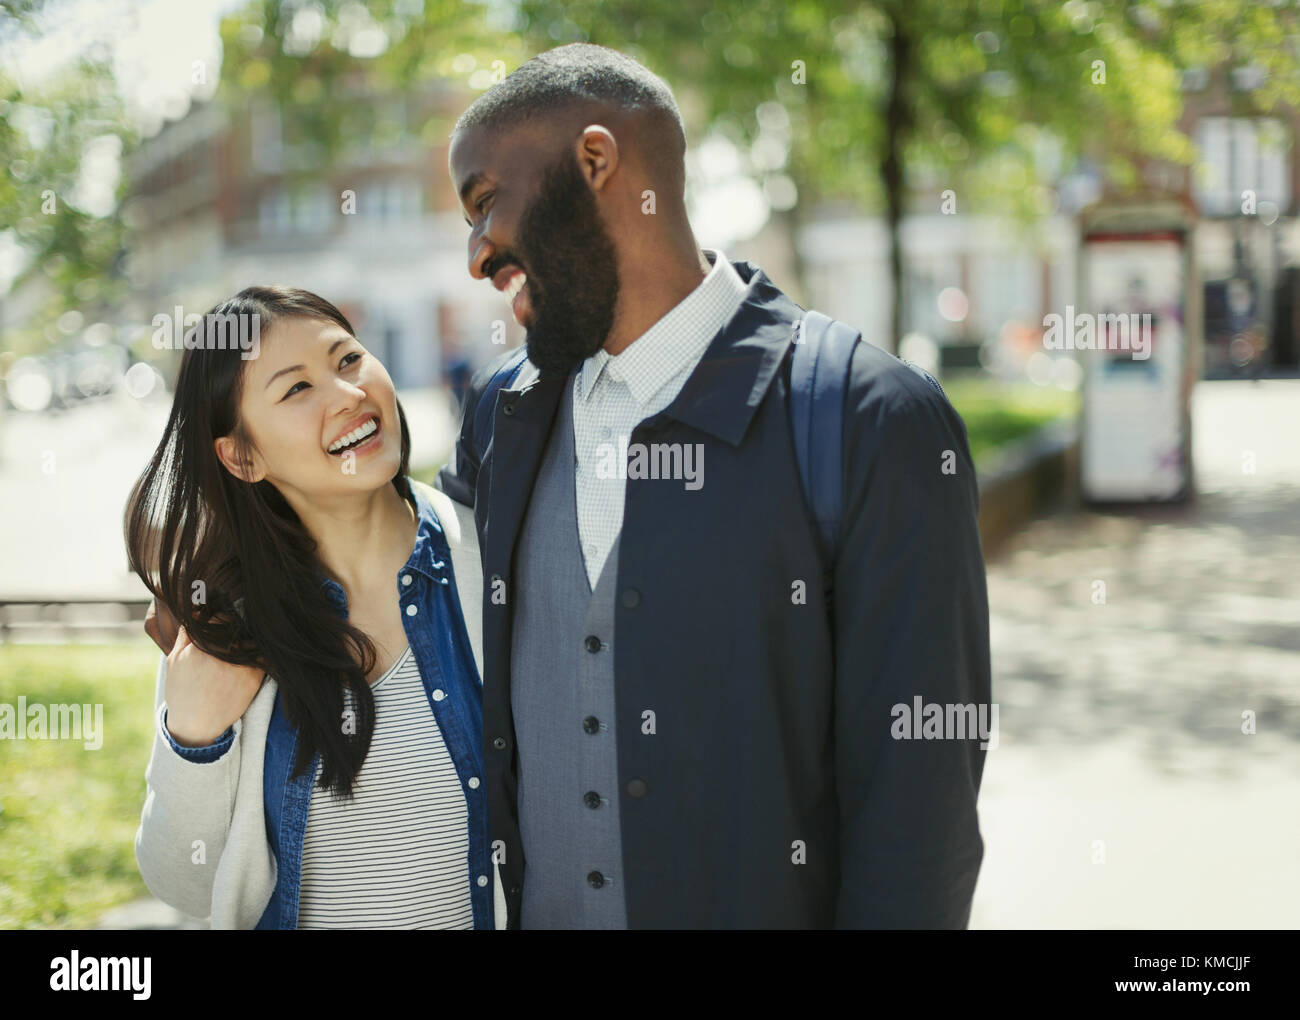 Affectionate couple laughing in sunny urban park Stock Photo